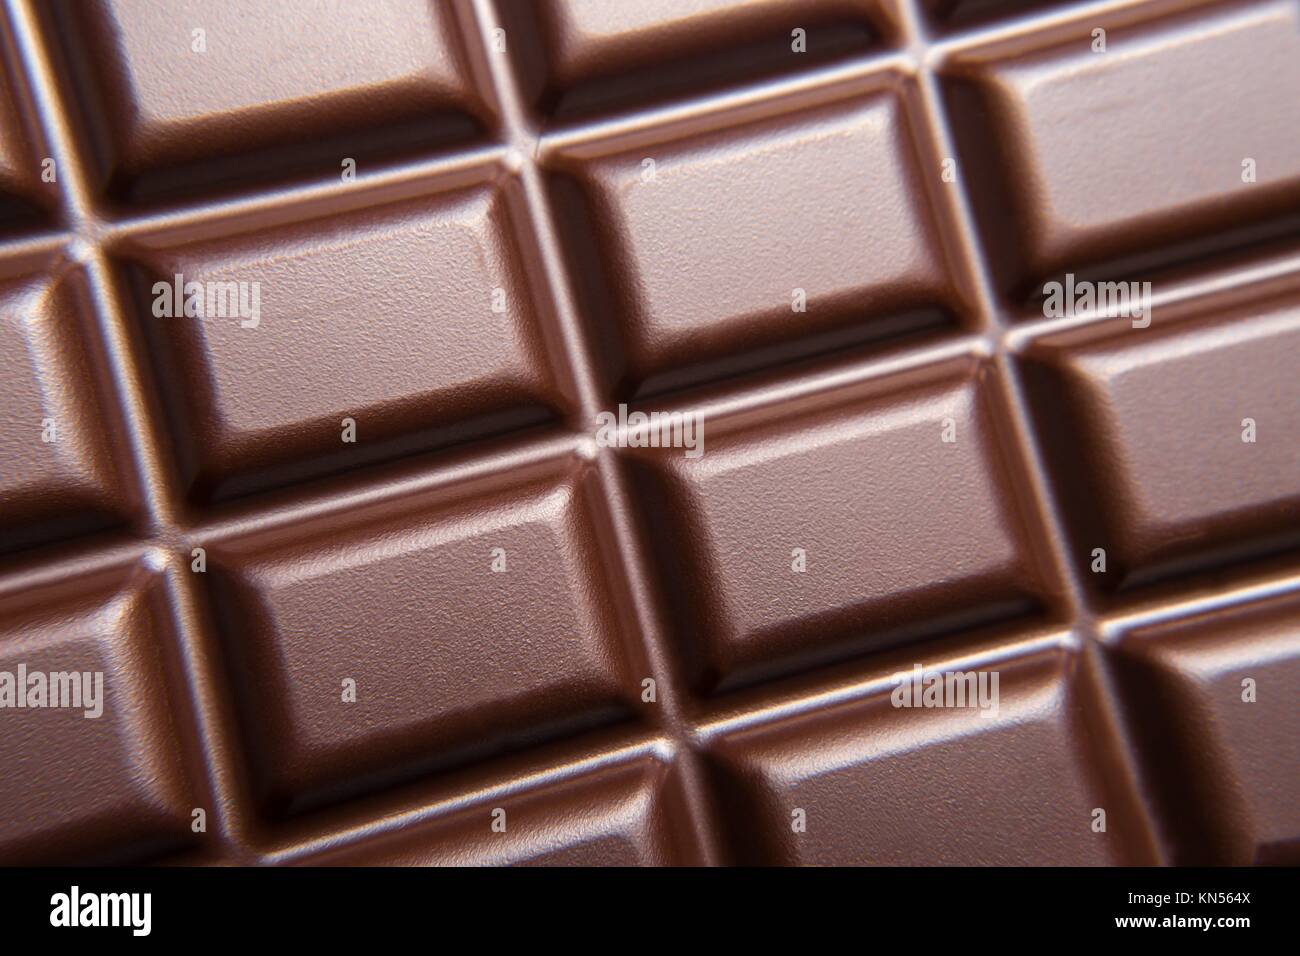 chocolate bar, view from above. Stock Photo